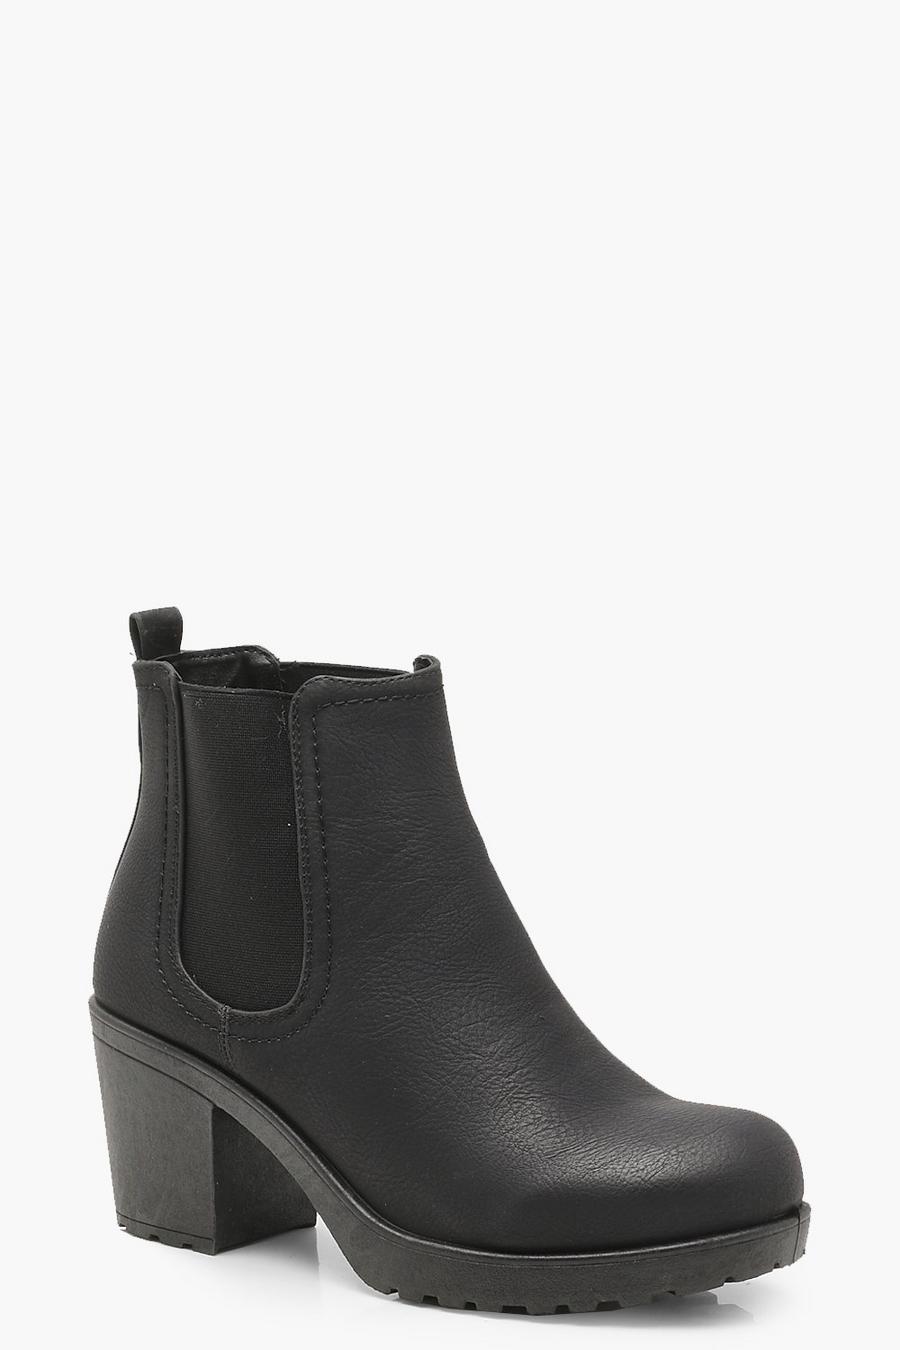 Black schwarz Wide Fit Chunky Cleated Heel Chelsea Boots